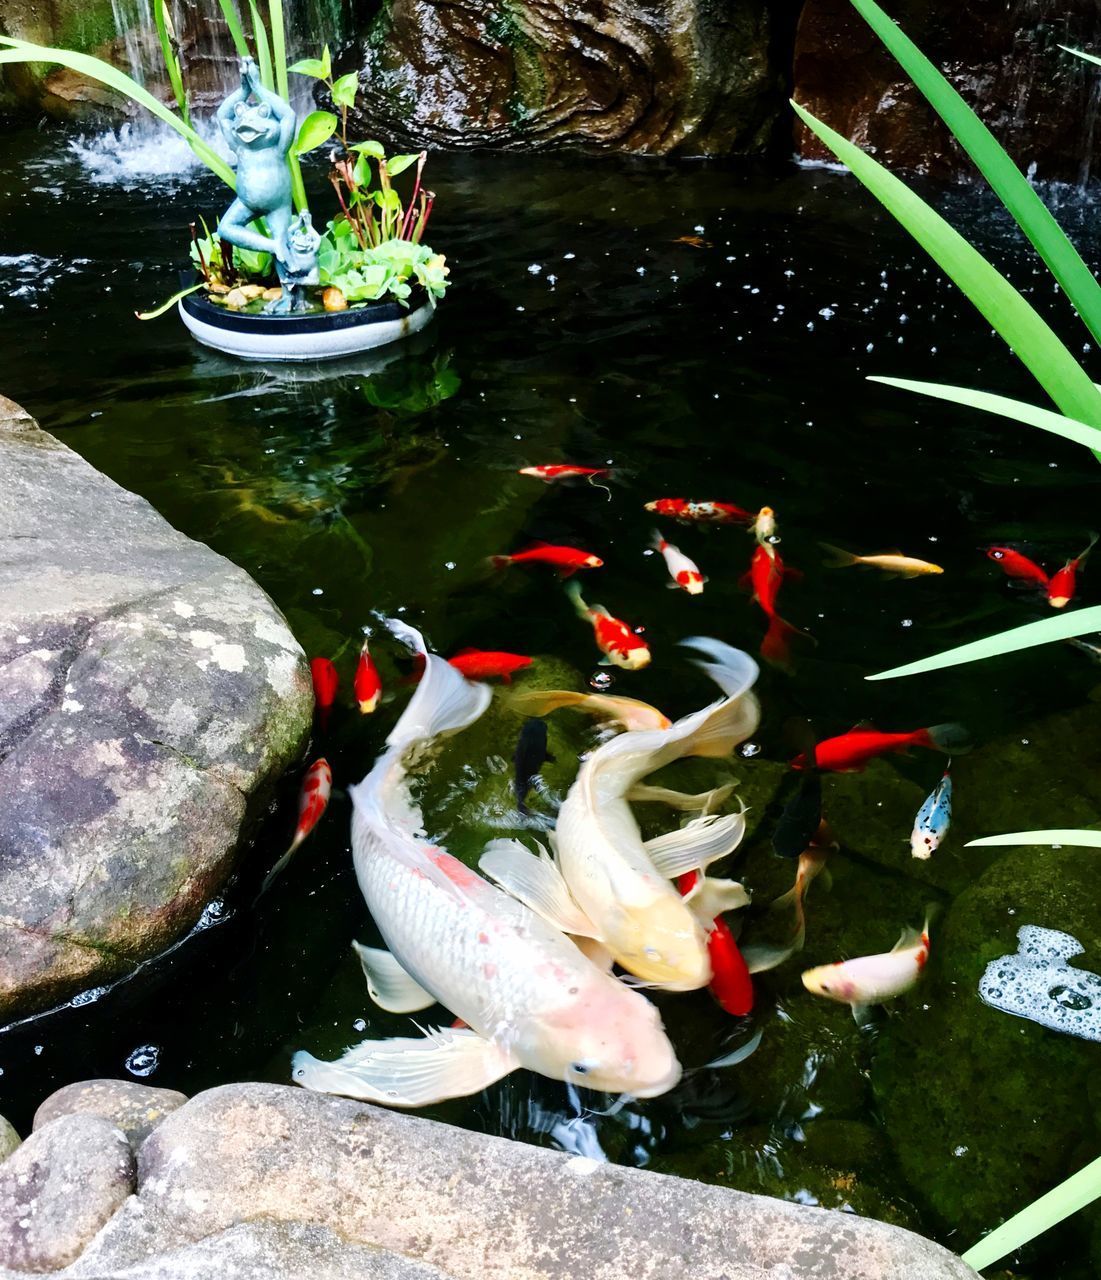 HIGH ANGLE VIEW OF KOI FISH IN WATER